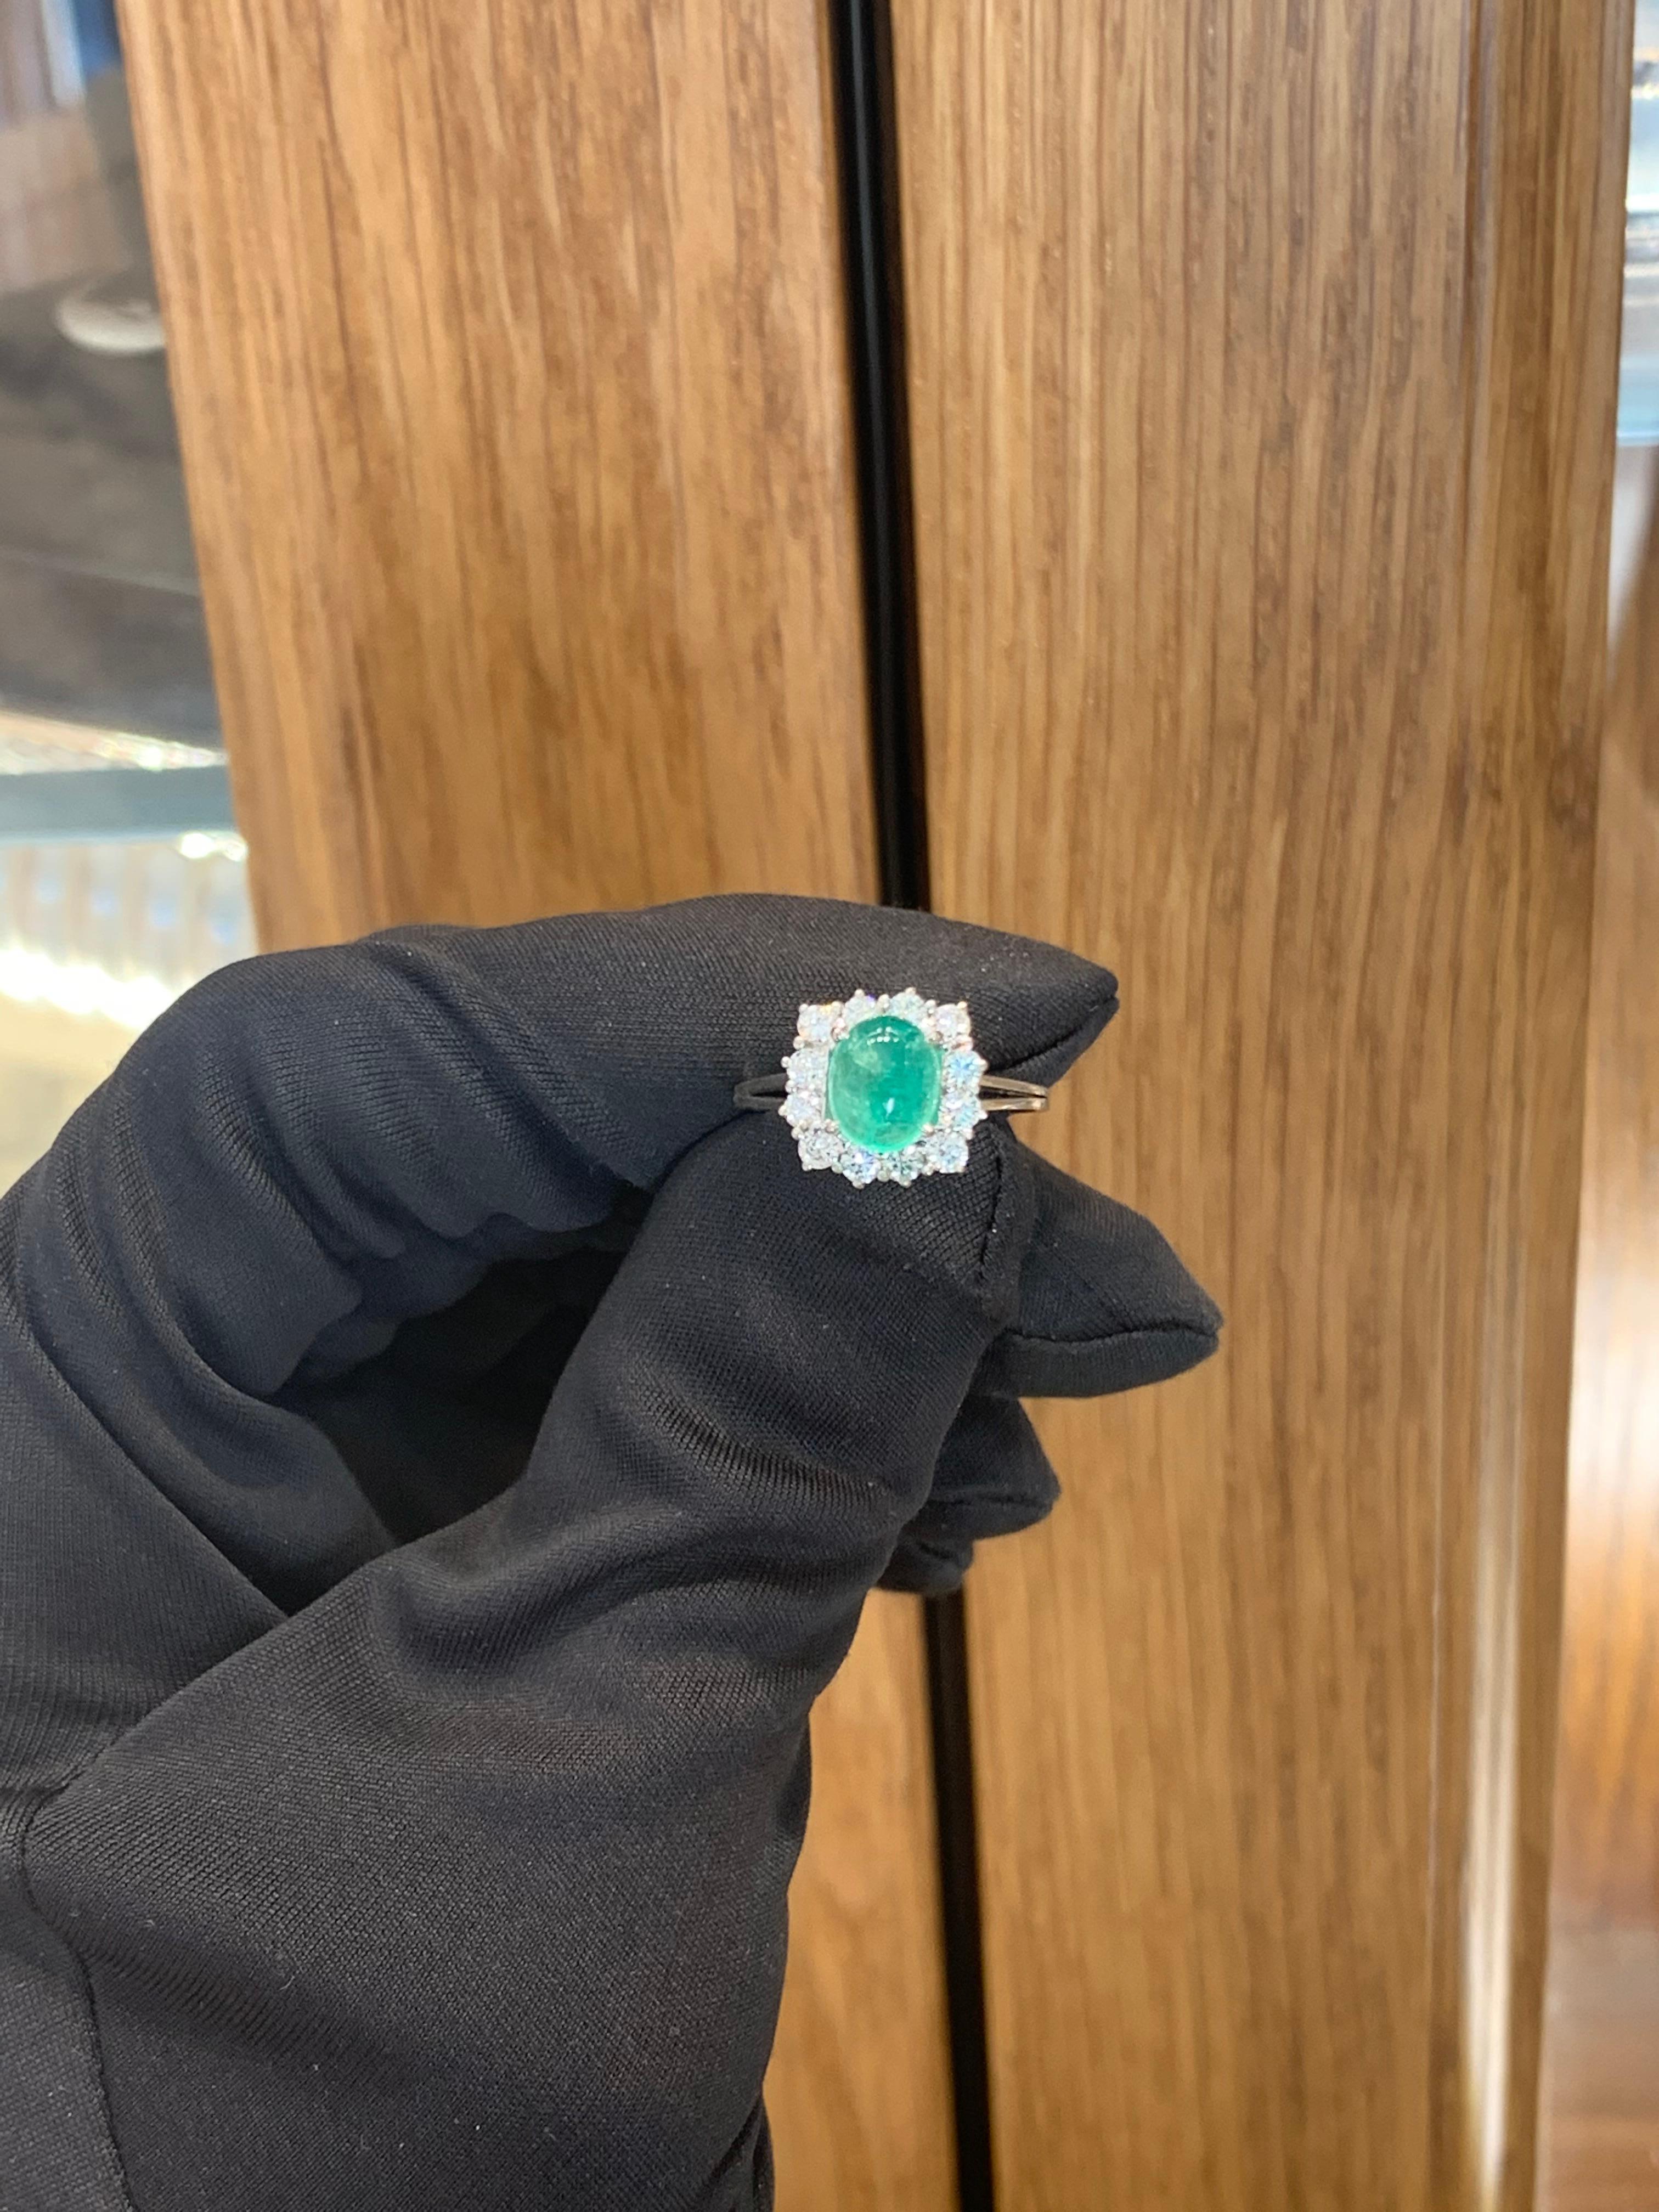 Beautifully Hand Crafted 18k Solid White Gold Green Emerald & Diamond Ring.
Incredible Craftsmanship, Very Well Made.
Approximately 1.8 Carat Cabochon Green Emerald.
Approximately 1.0 Carat of Diamonds.
Top Quality. Nice & Clean Stones.
Comfortable